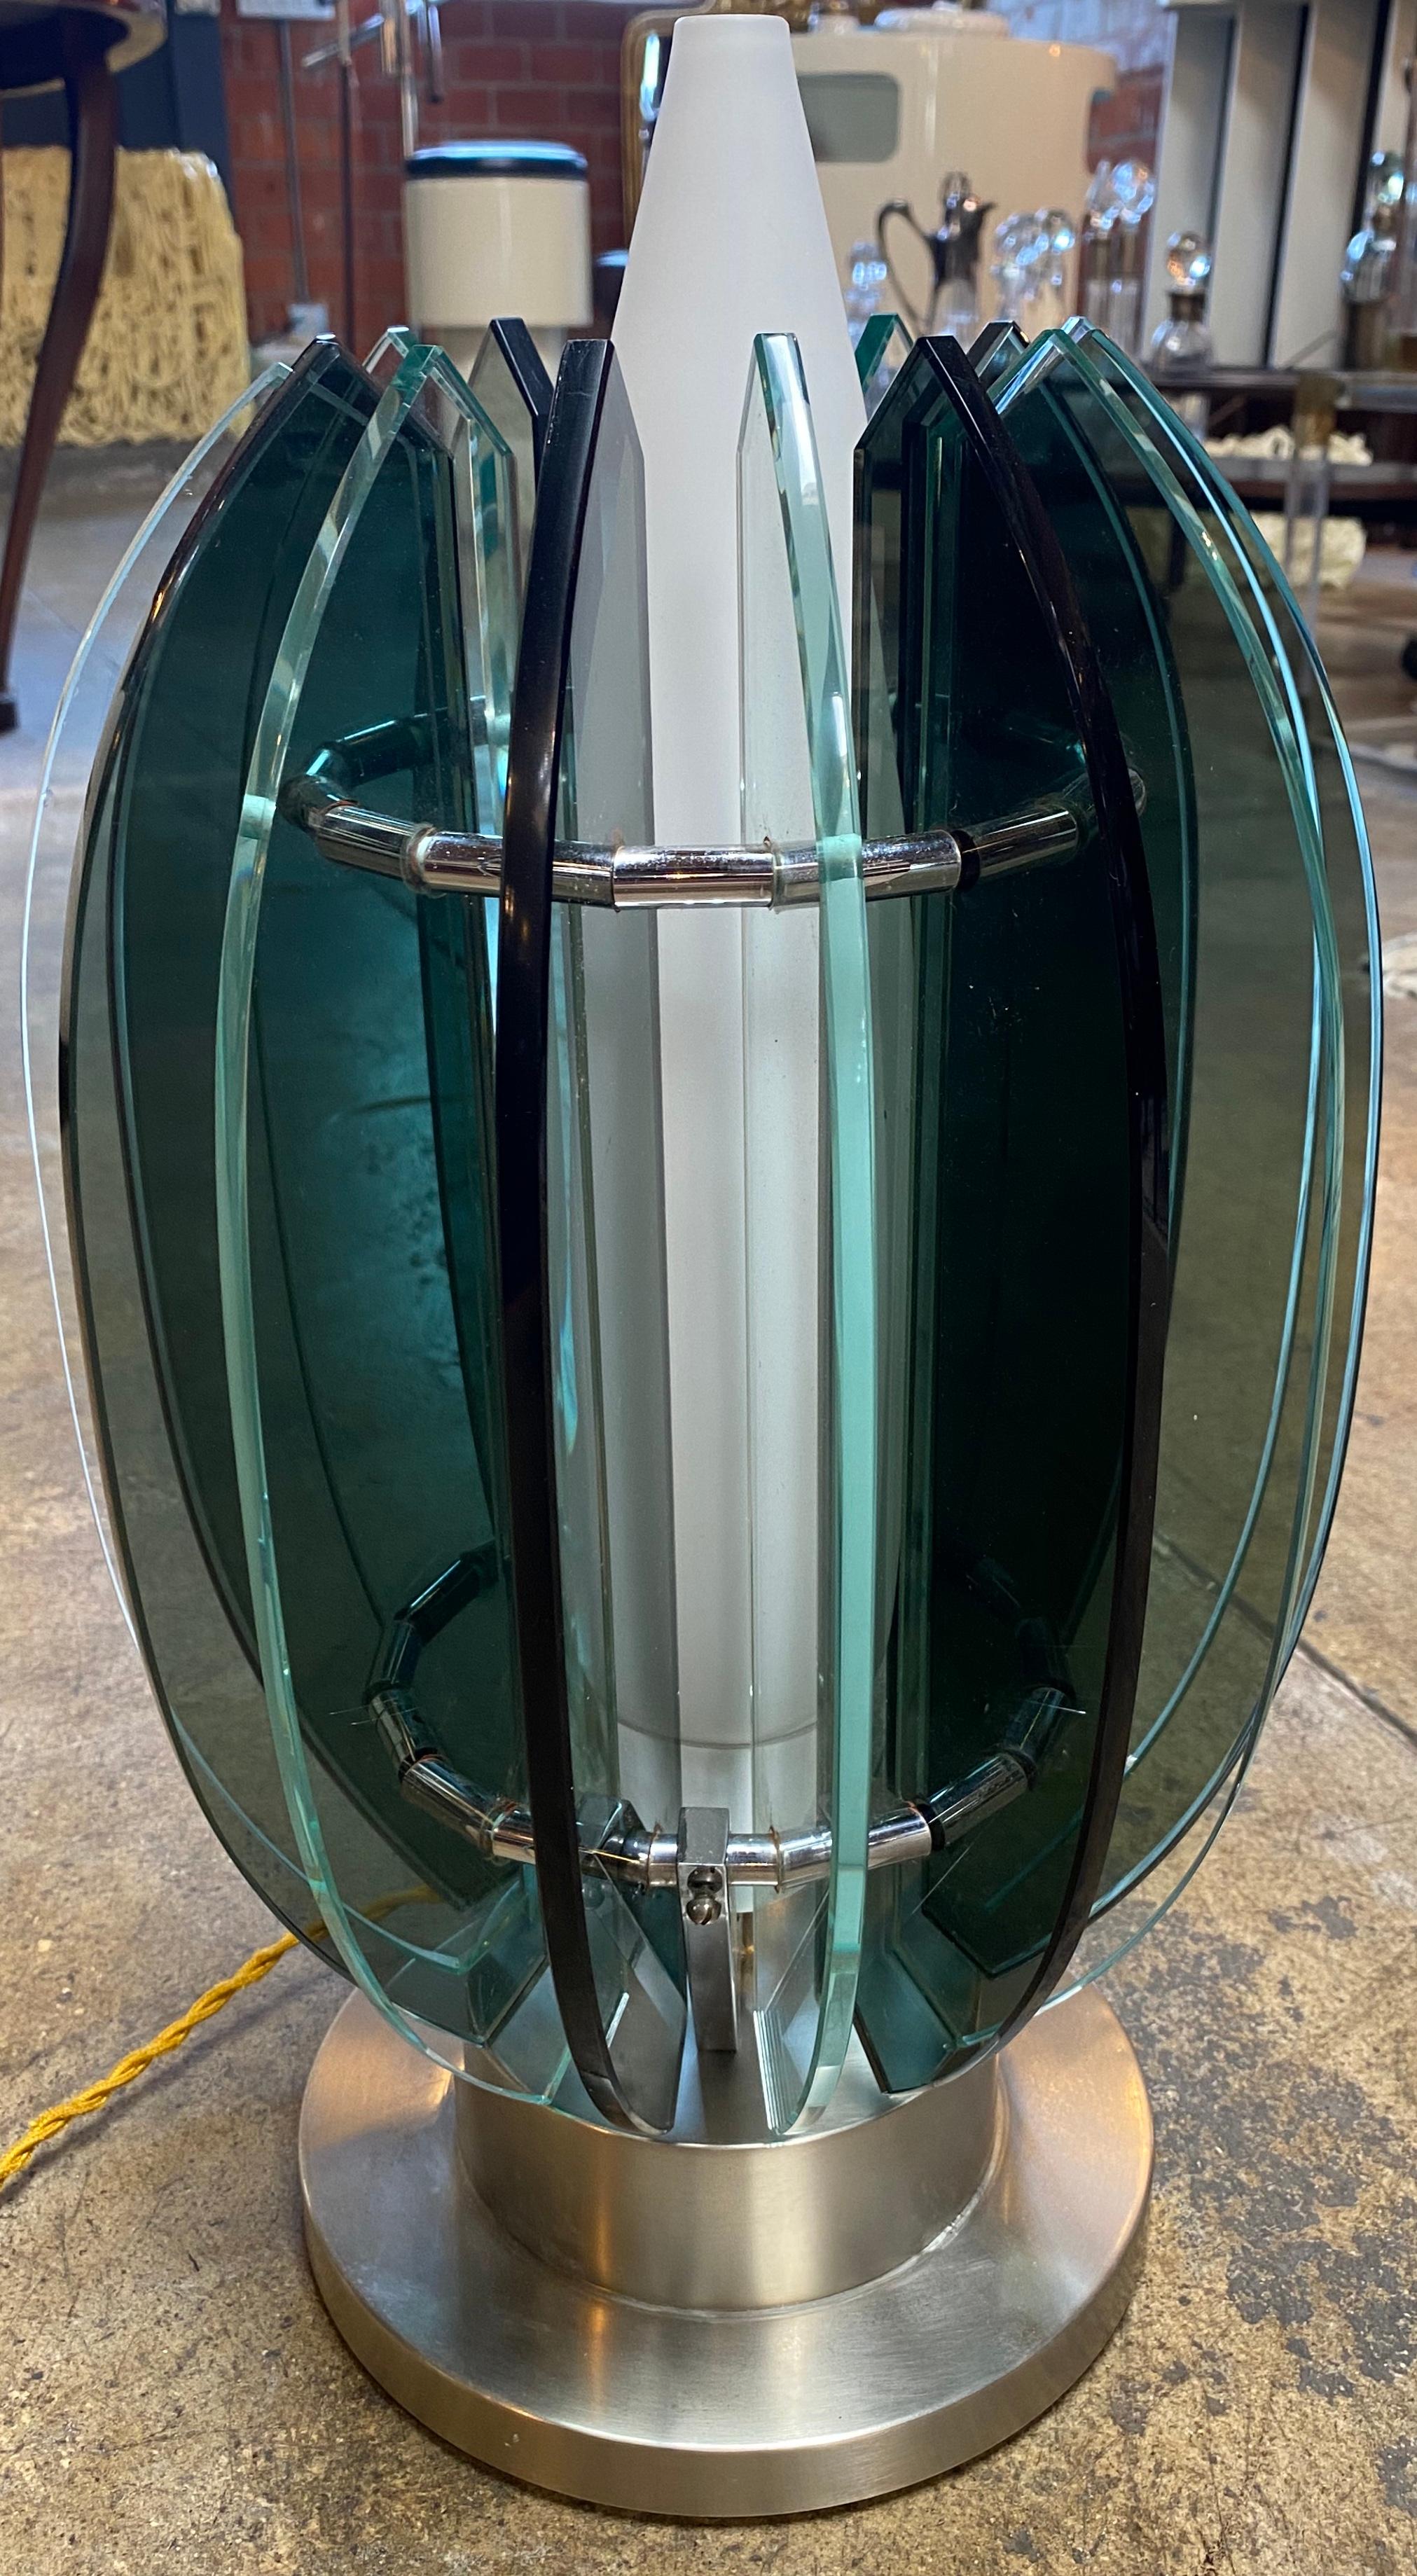 Stunning table lamp made with chrome base , opaline glass in the middle and 16 glass shade all around.
This piece is very unique and ultra rare.